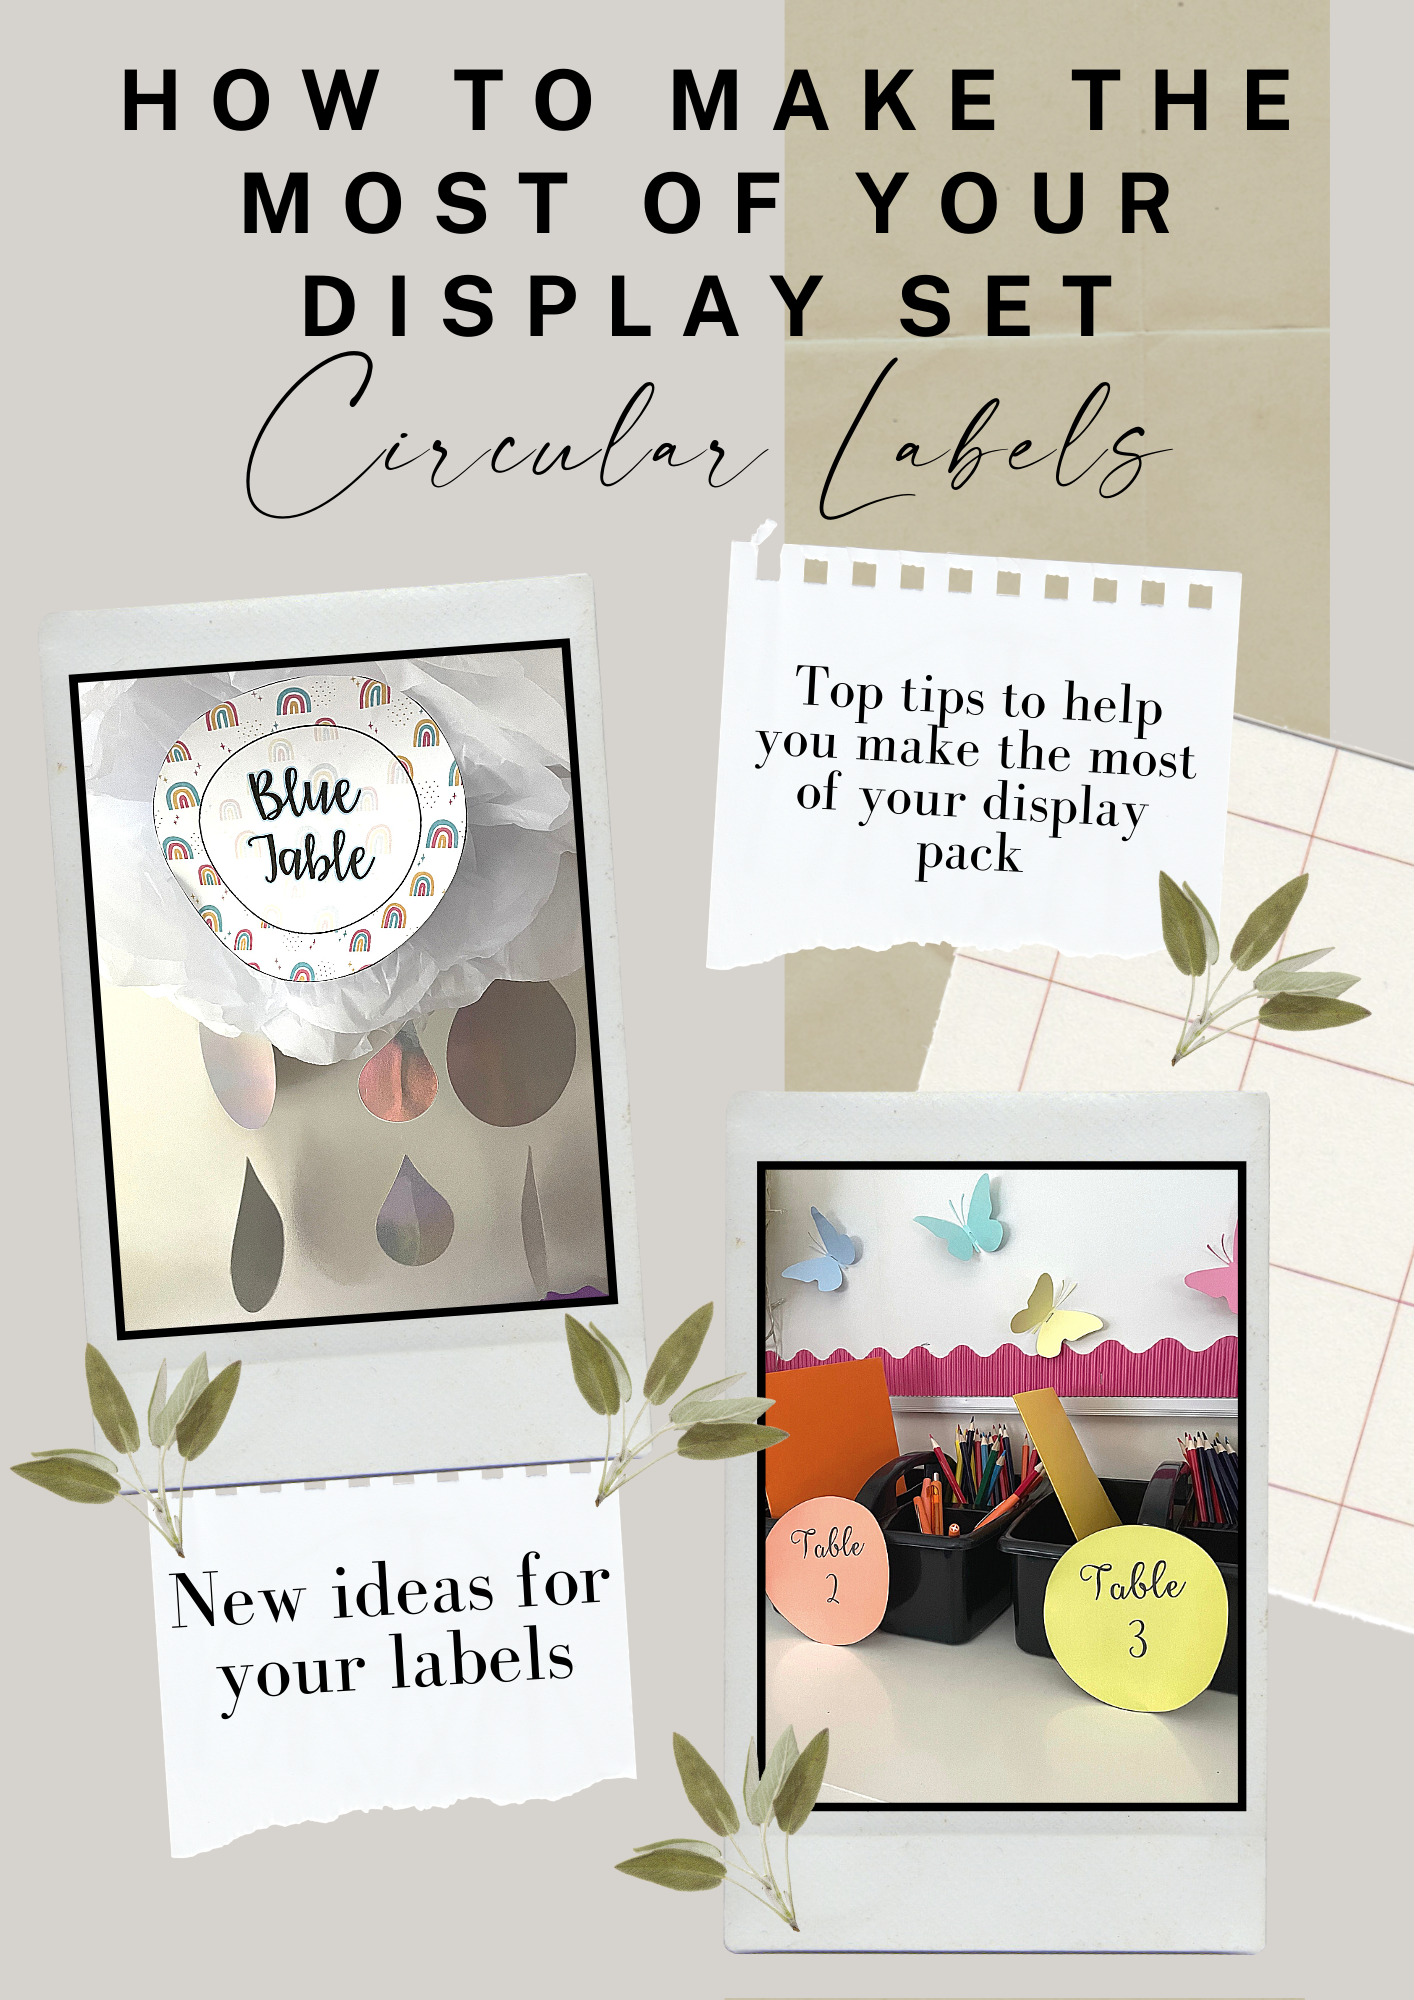 How to make the most of your display sets: Circular Labels